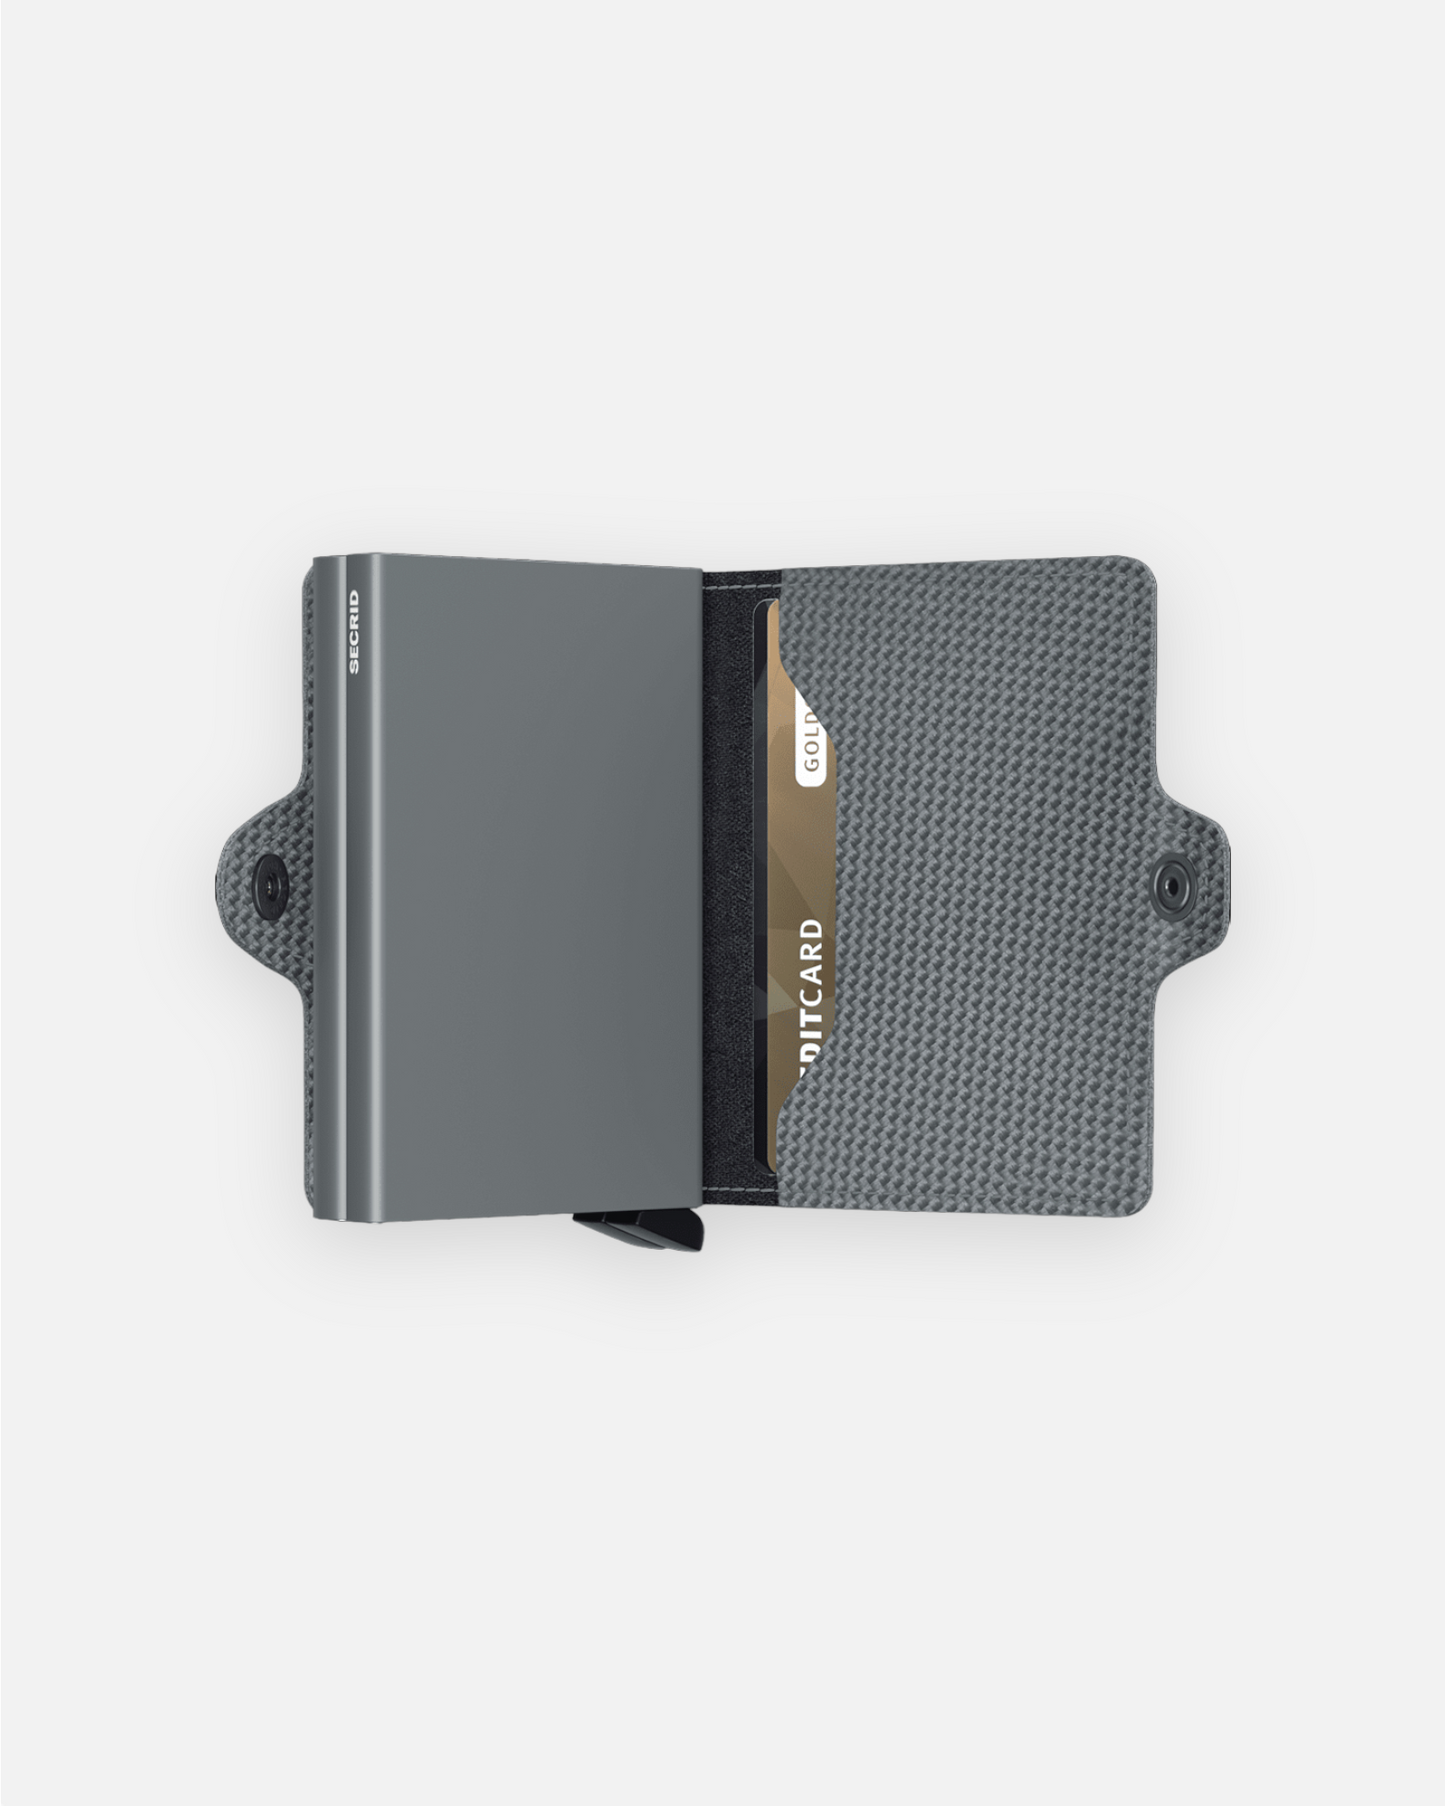 TWINWALLET (CARBON COOL GREY)